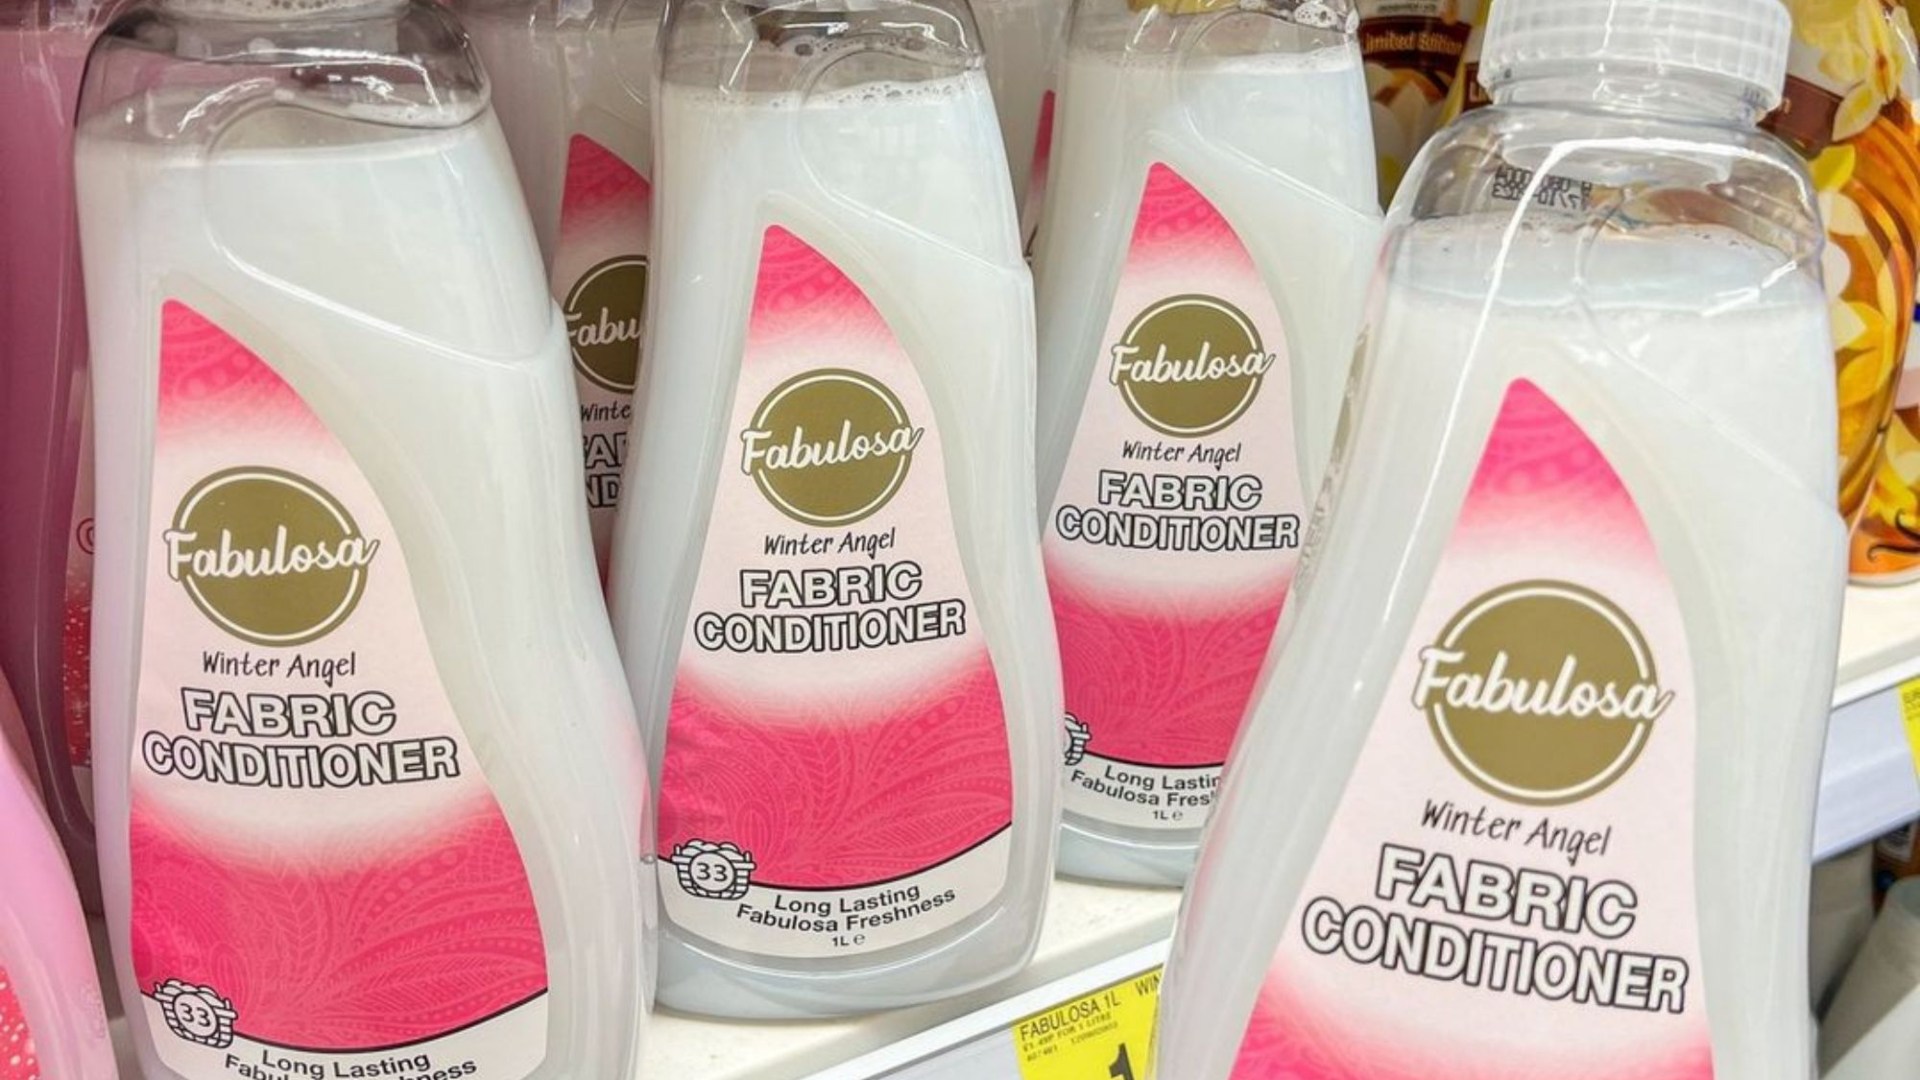 Fabulosa drops brand new Snow Fairy fabric conditioner dupe - but fans are left disappointed